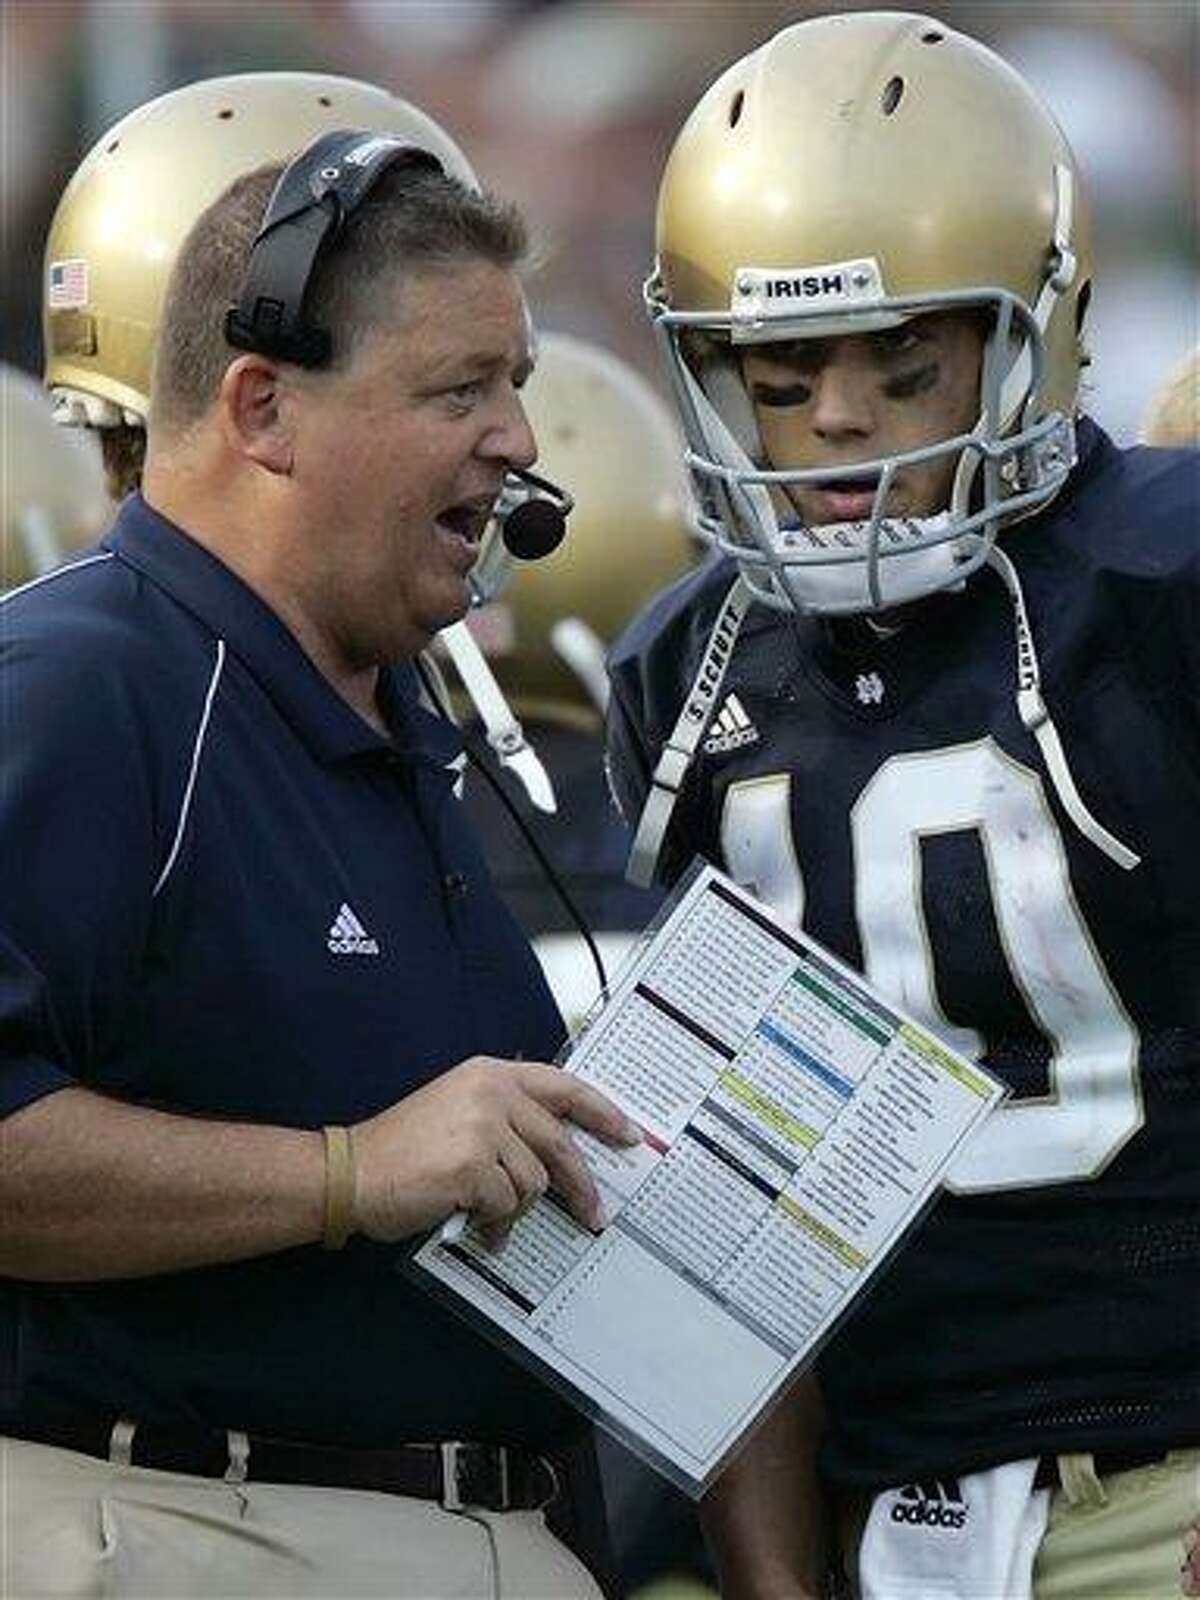 In this Sept. 9, 2009, file photo, Notre Dame quarterback Brady Quinn, right, and coach Charlie Weis talk on the sideline during an NCAA college football game against Penn State in South Bend, Ind. Quinn, now playing for the NFL's Cleveland Browns, says Notre Dame would be making a "horrible decision" if it fires coach Charlie Weis. Quinn played two seasons for Weis with the Fighting Irish and says there have been a "lot of circumstances" leading to Notre Dame's slide. (AP Photo/Michael Conroy, File)